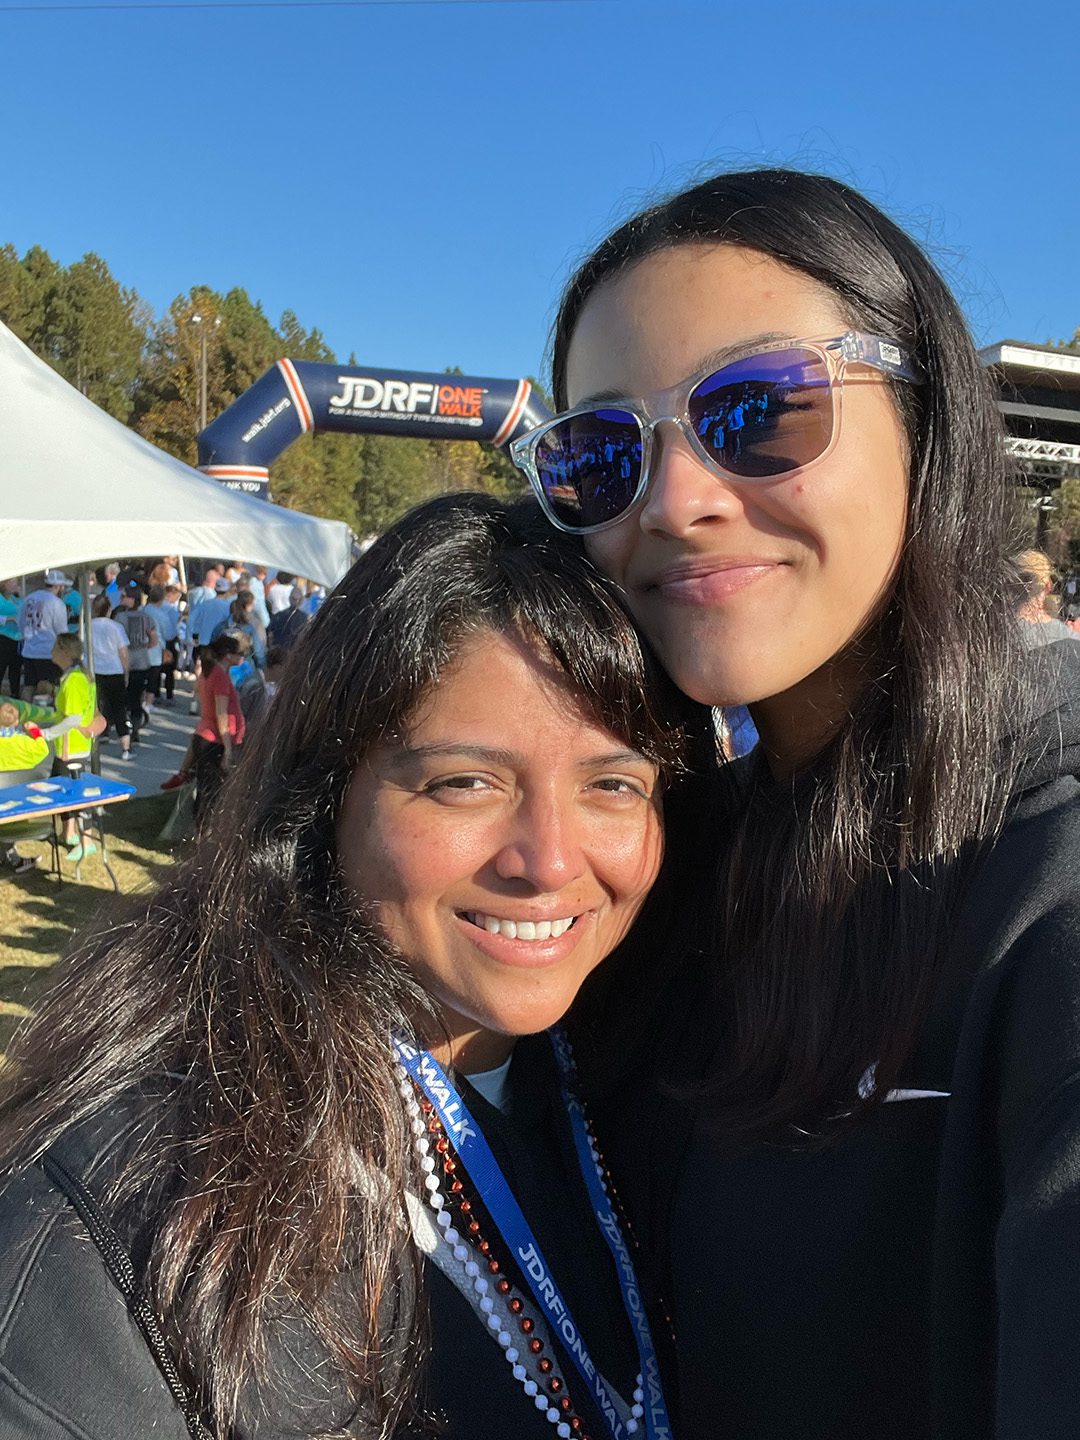 MPV team mother and daughter at JDRF One Walk smiling on sunny morning